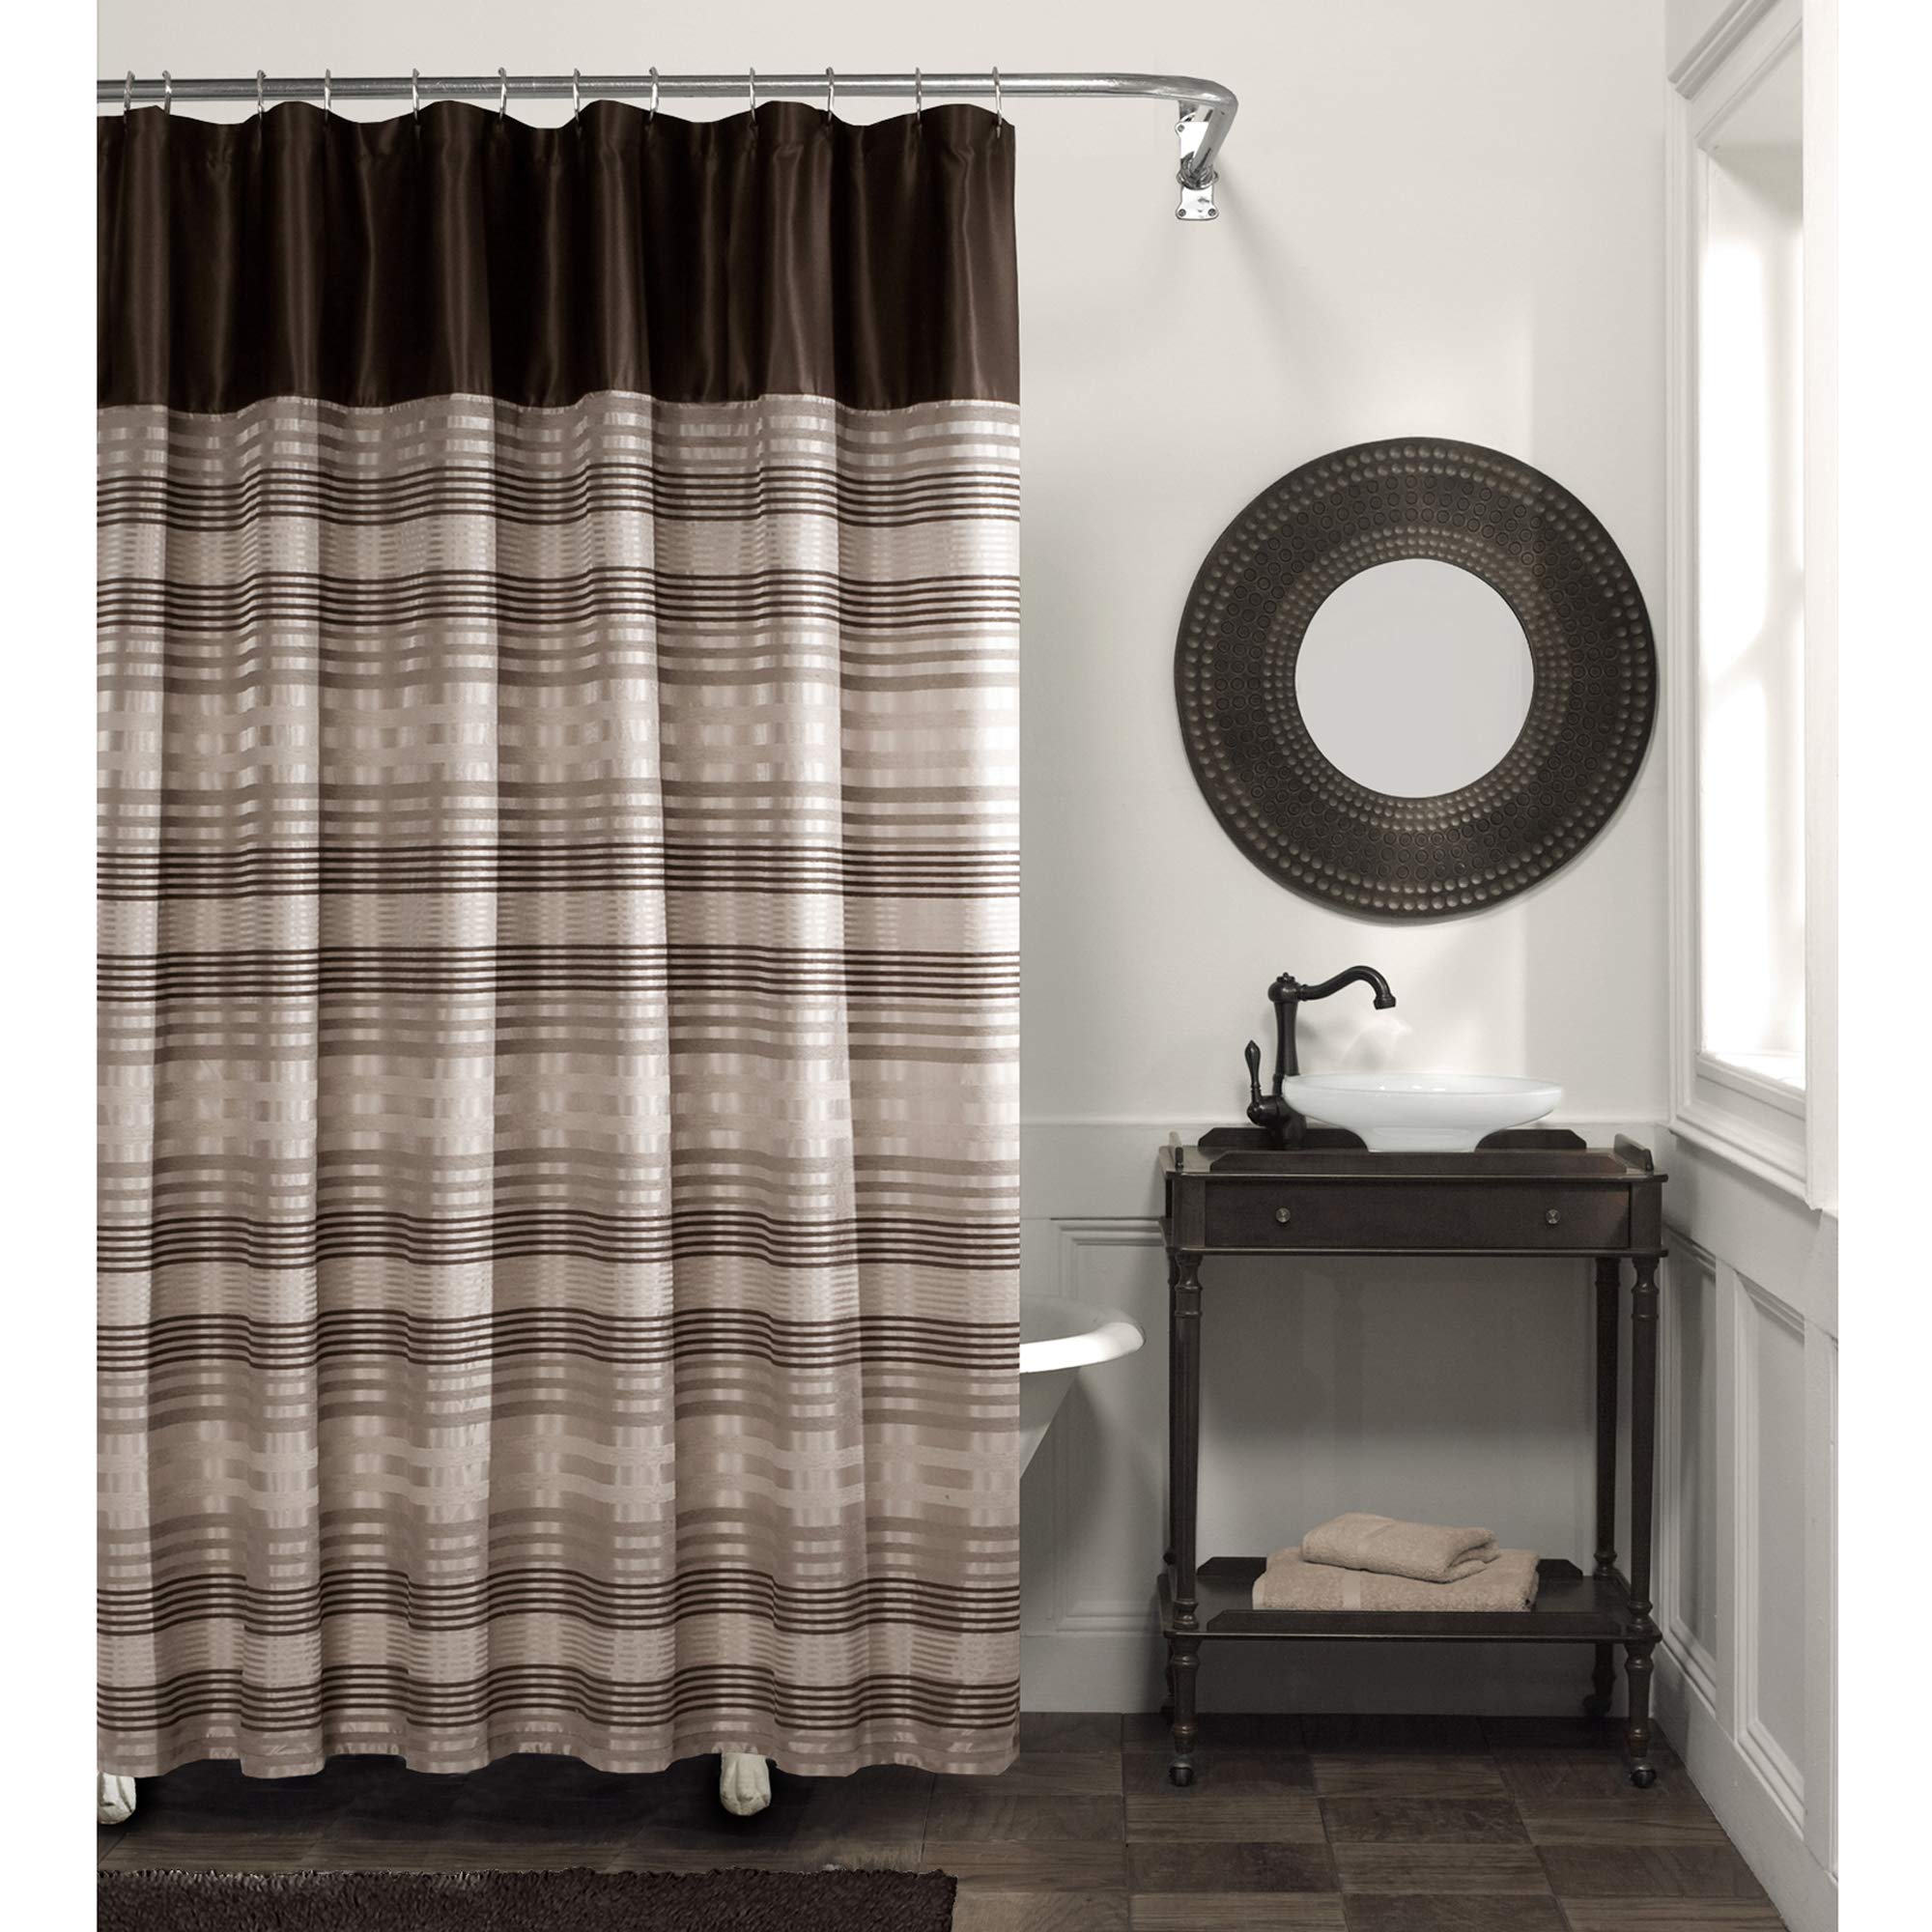 Book Cover MAYTEX Blake Chenille Striped Fabric Shower Curtain, Brown Multi Blake Chenille 70 by 72